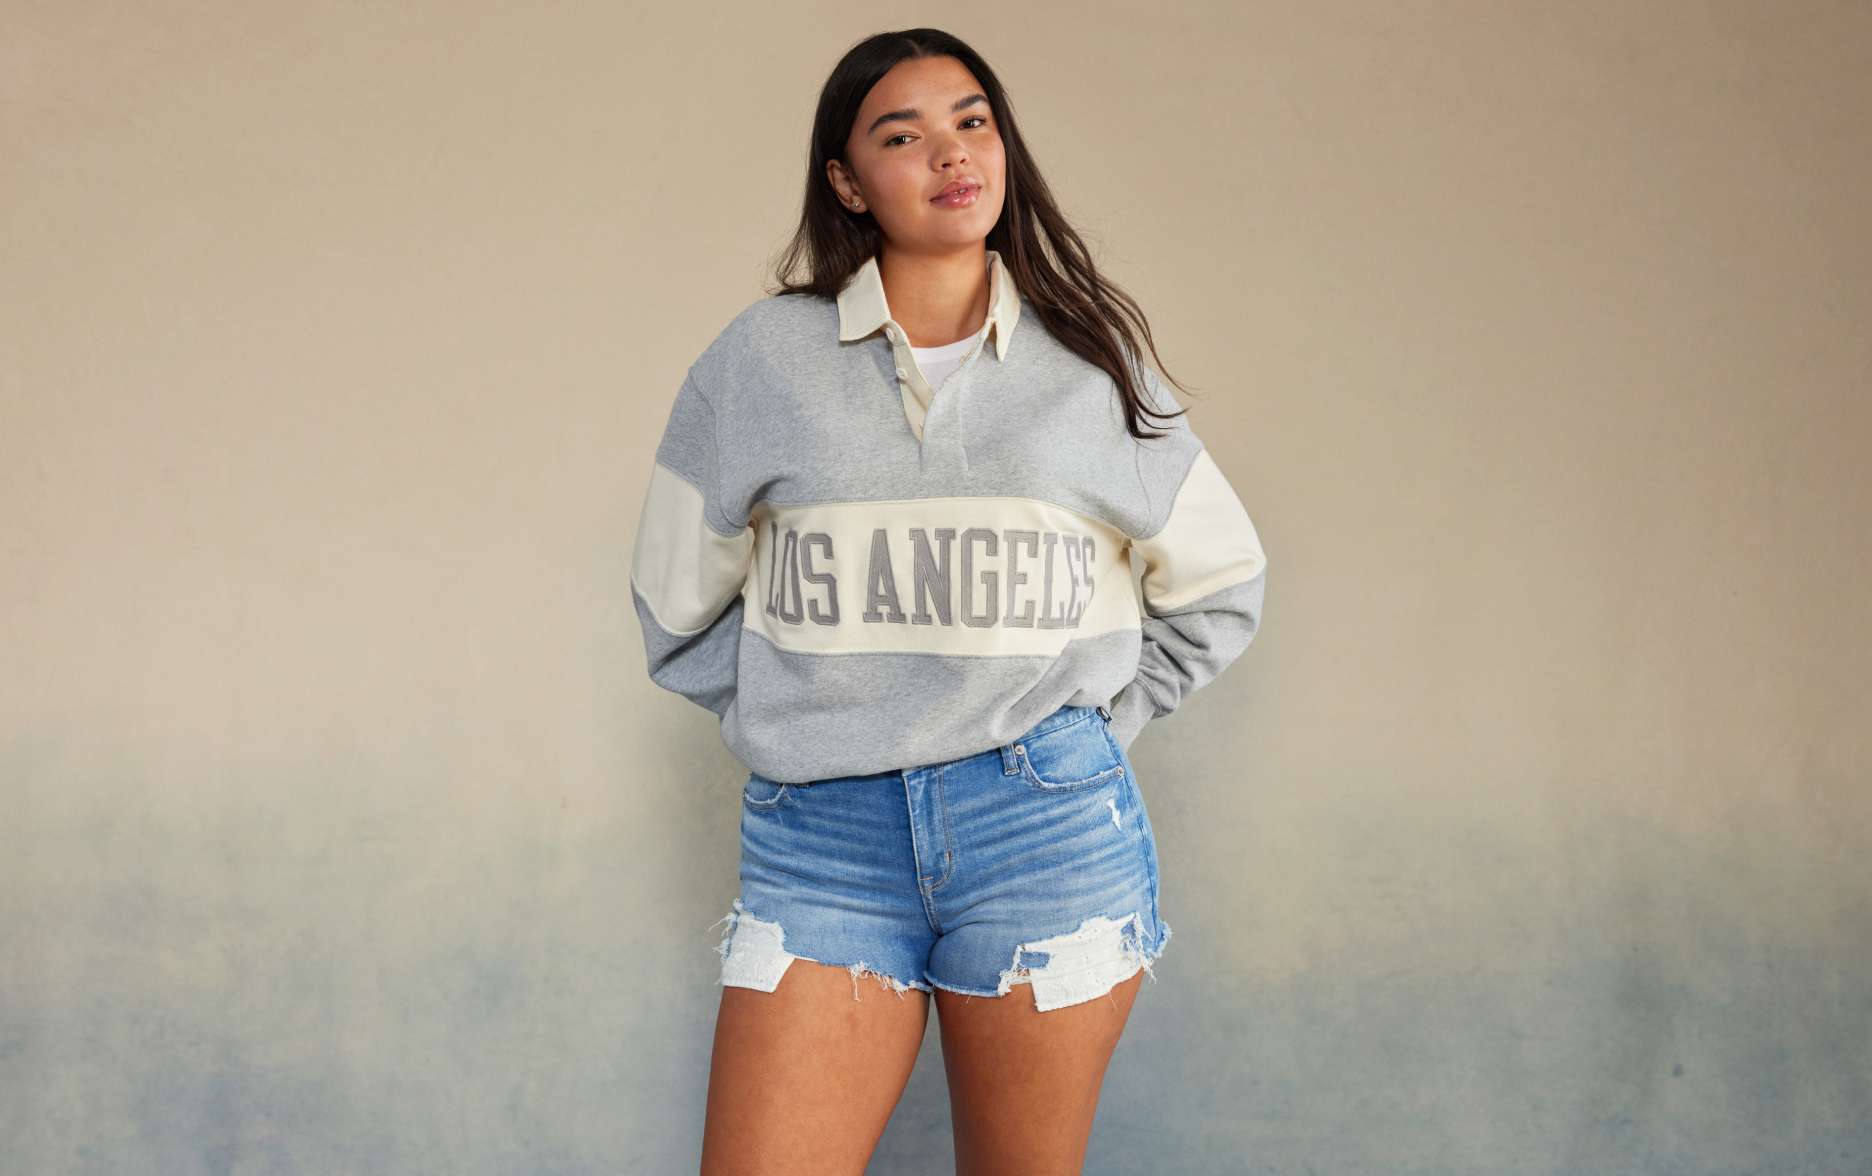 model in denim shorts and los angeles pull over